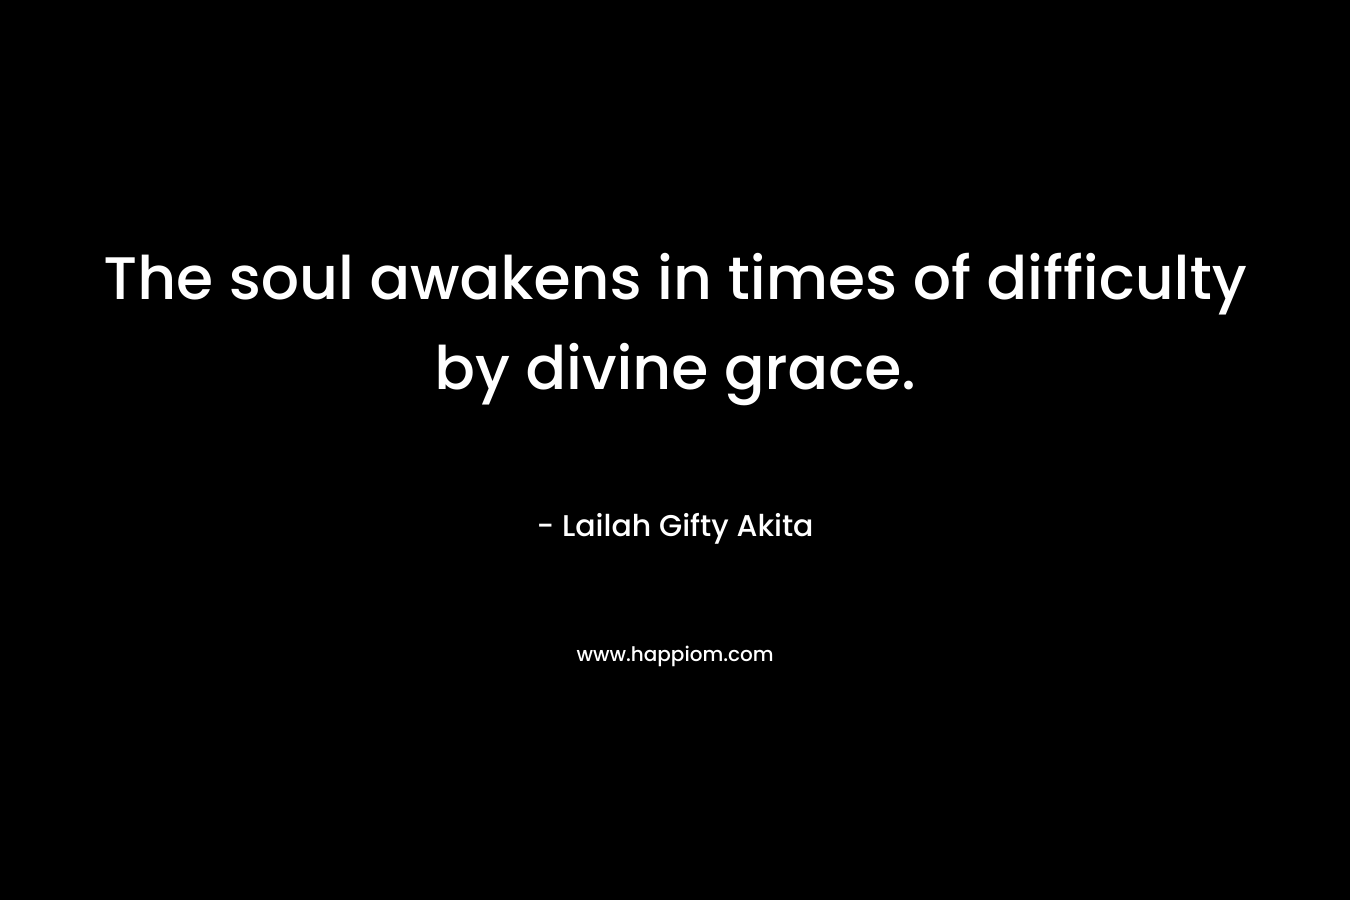 The soul awakens in times of difficulty by divine grace.